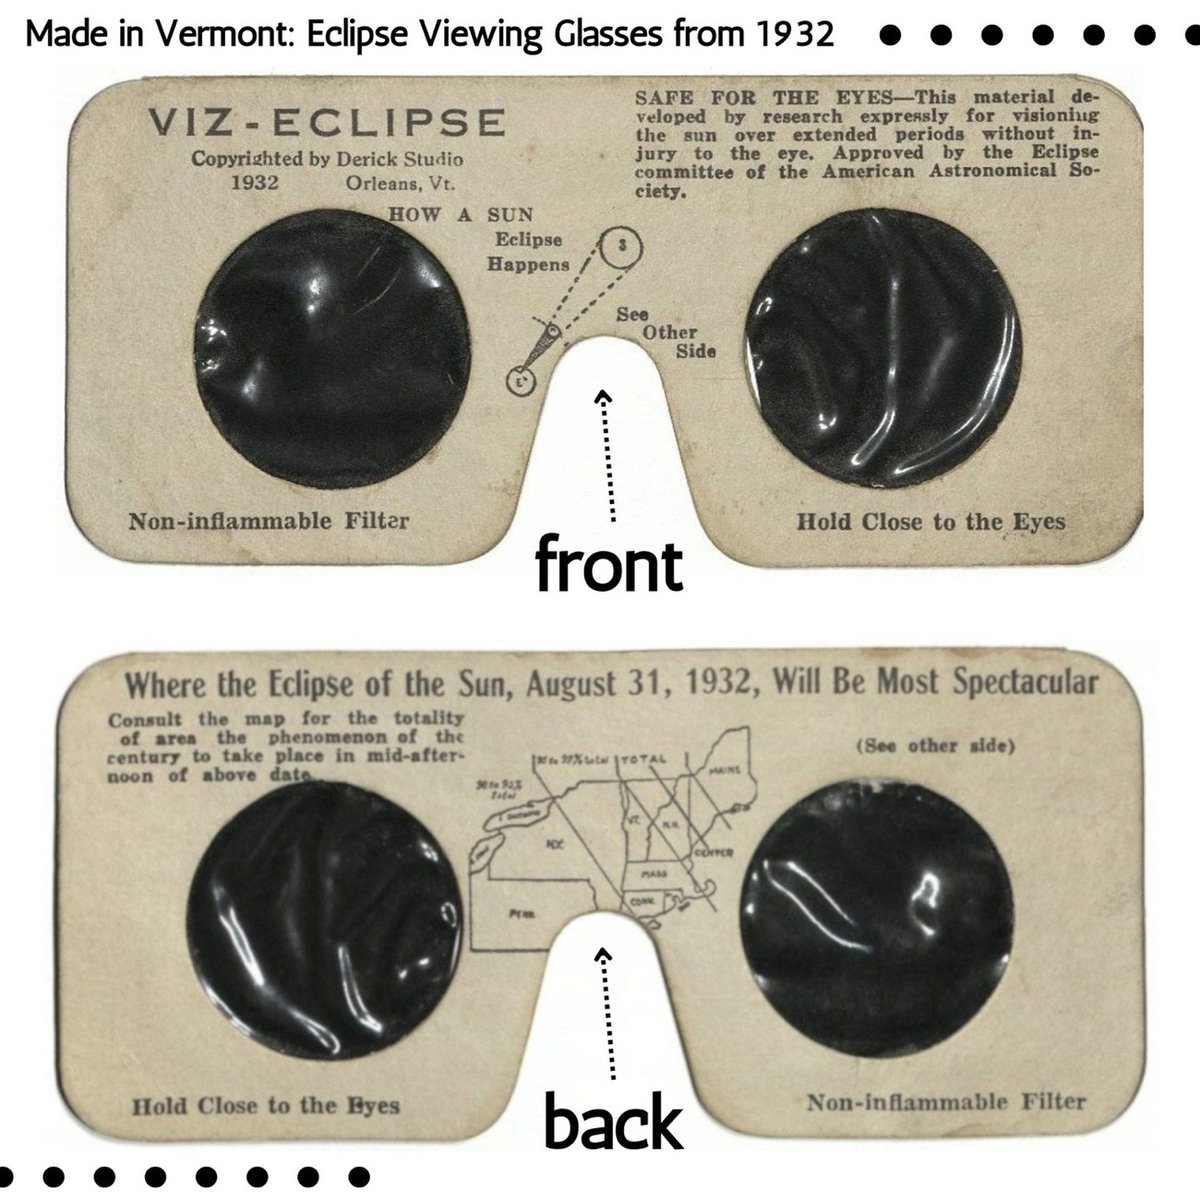 a set of eclipse glasses from 1932